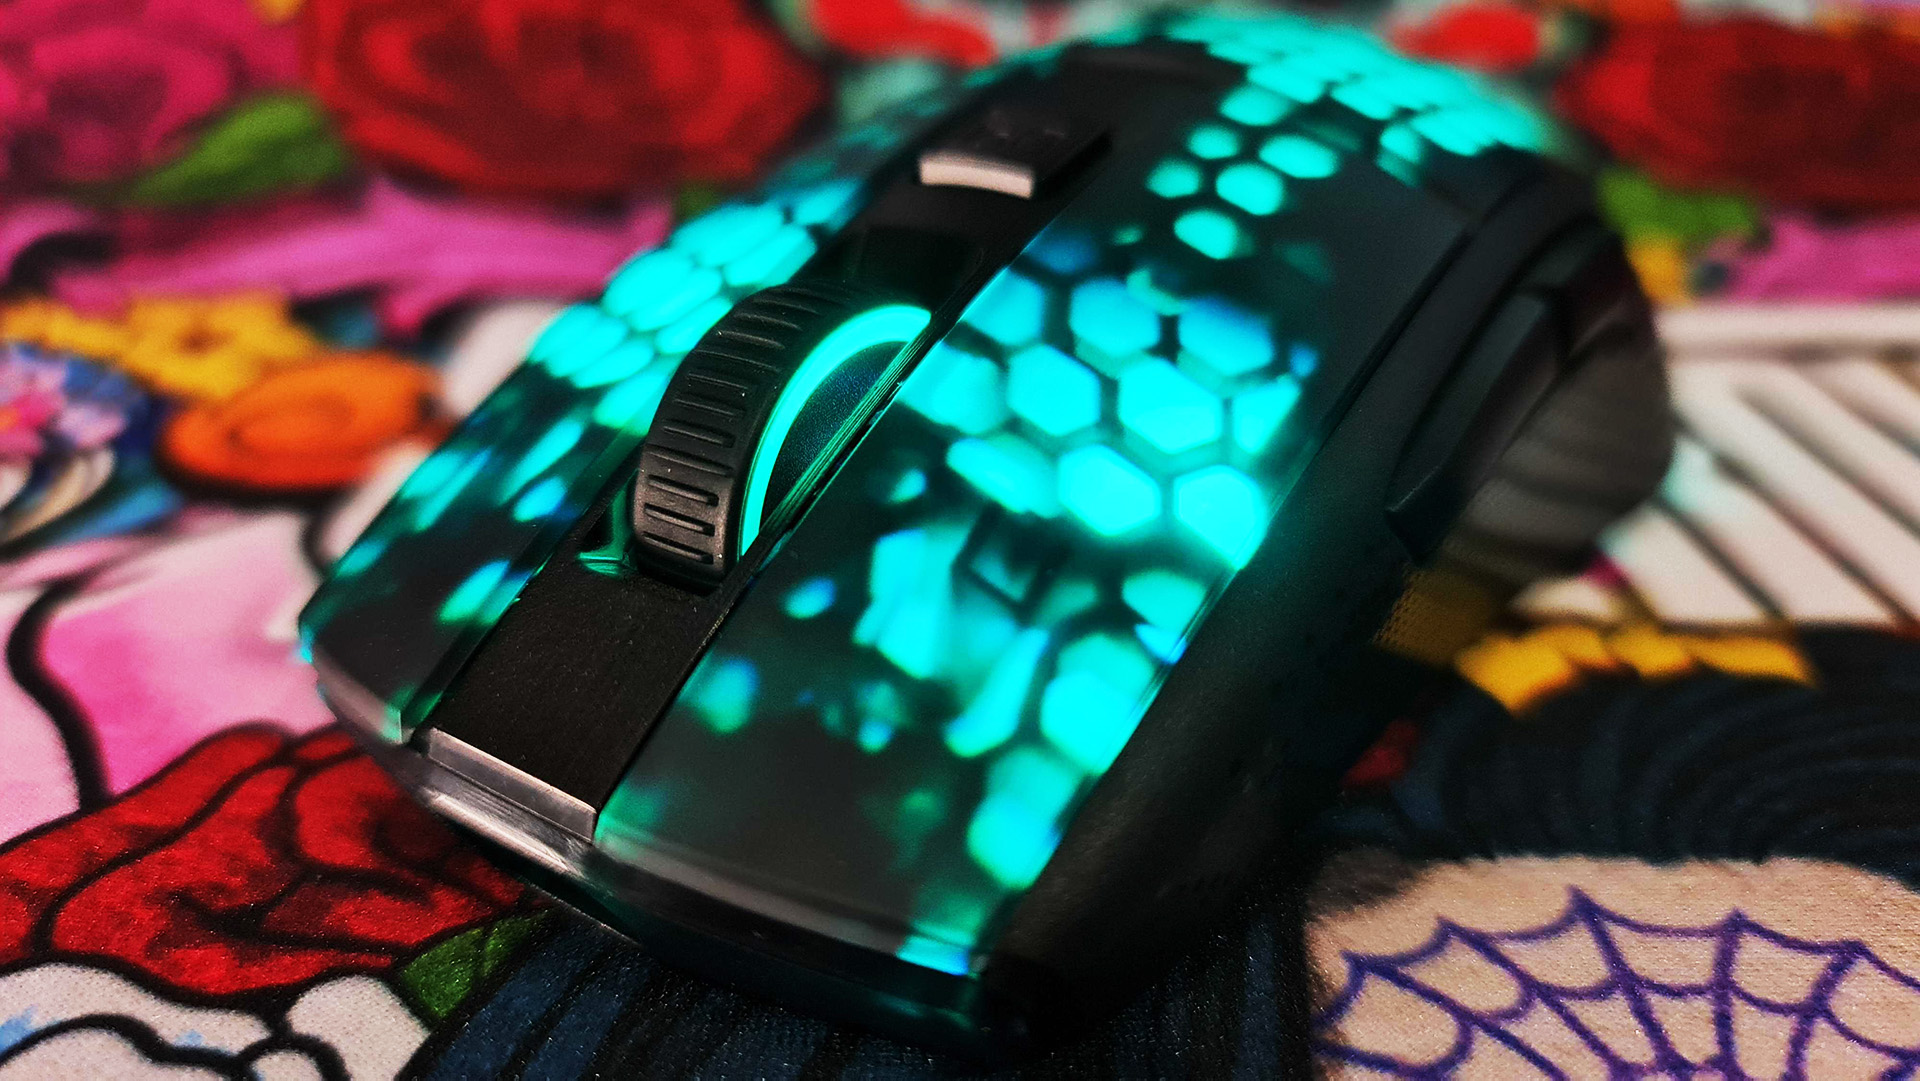 Roccat Burst Pro Air gaming mouse with RGB LEDs enabled on colourful deskmat.